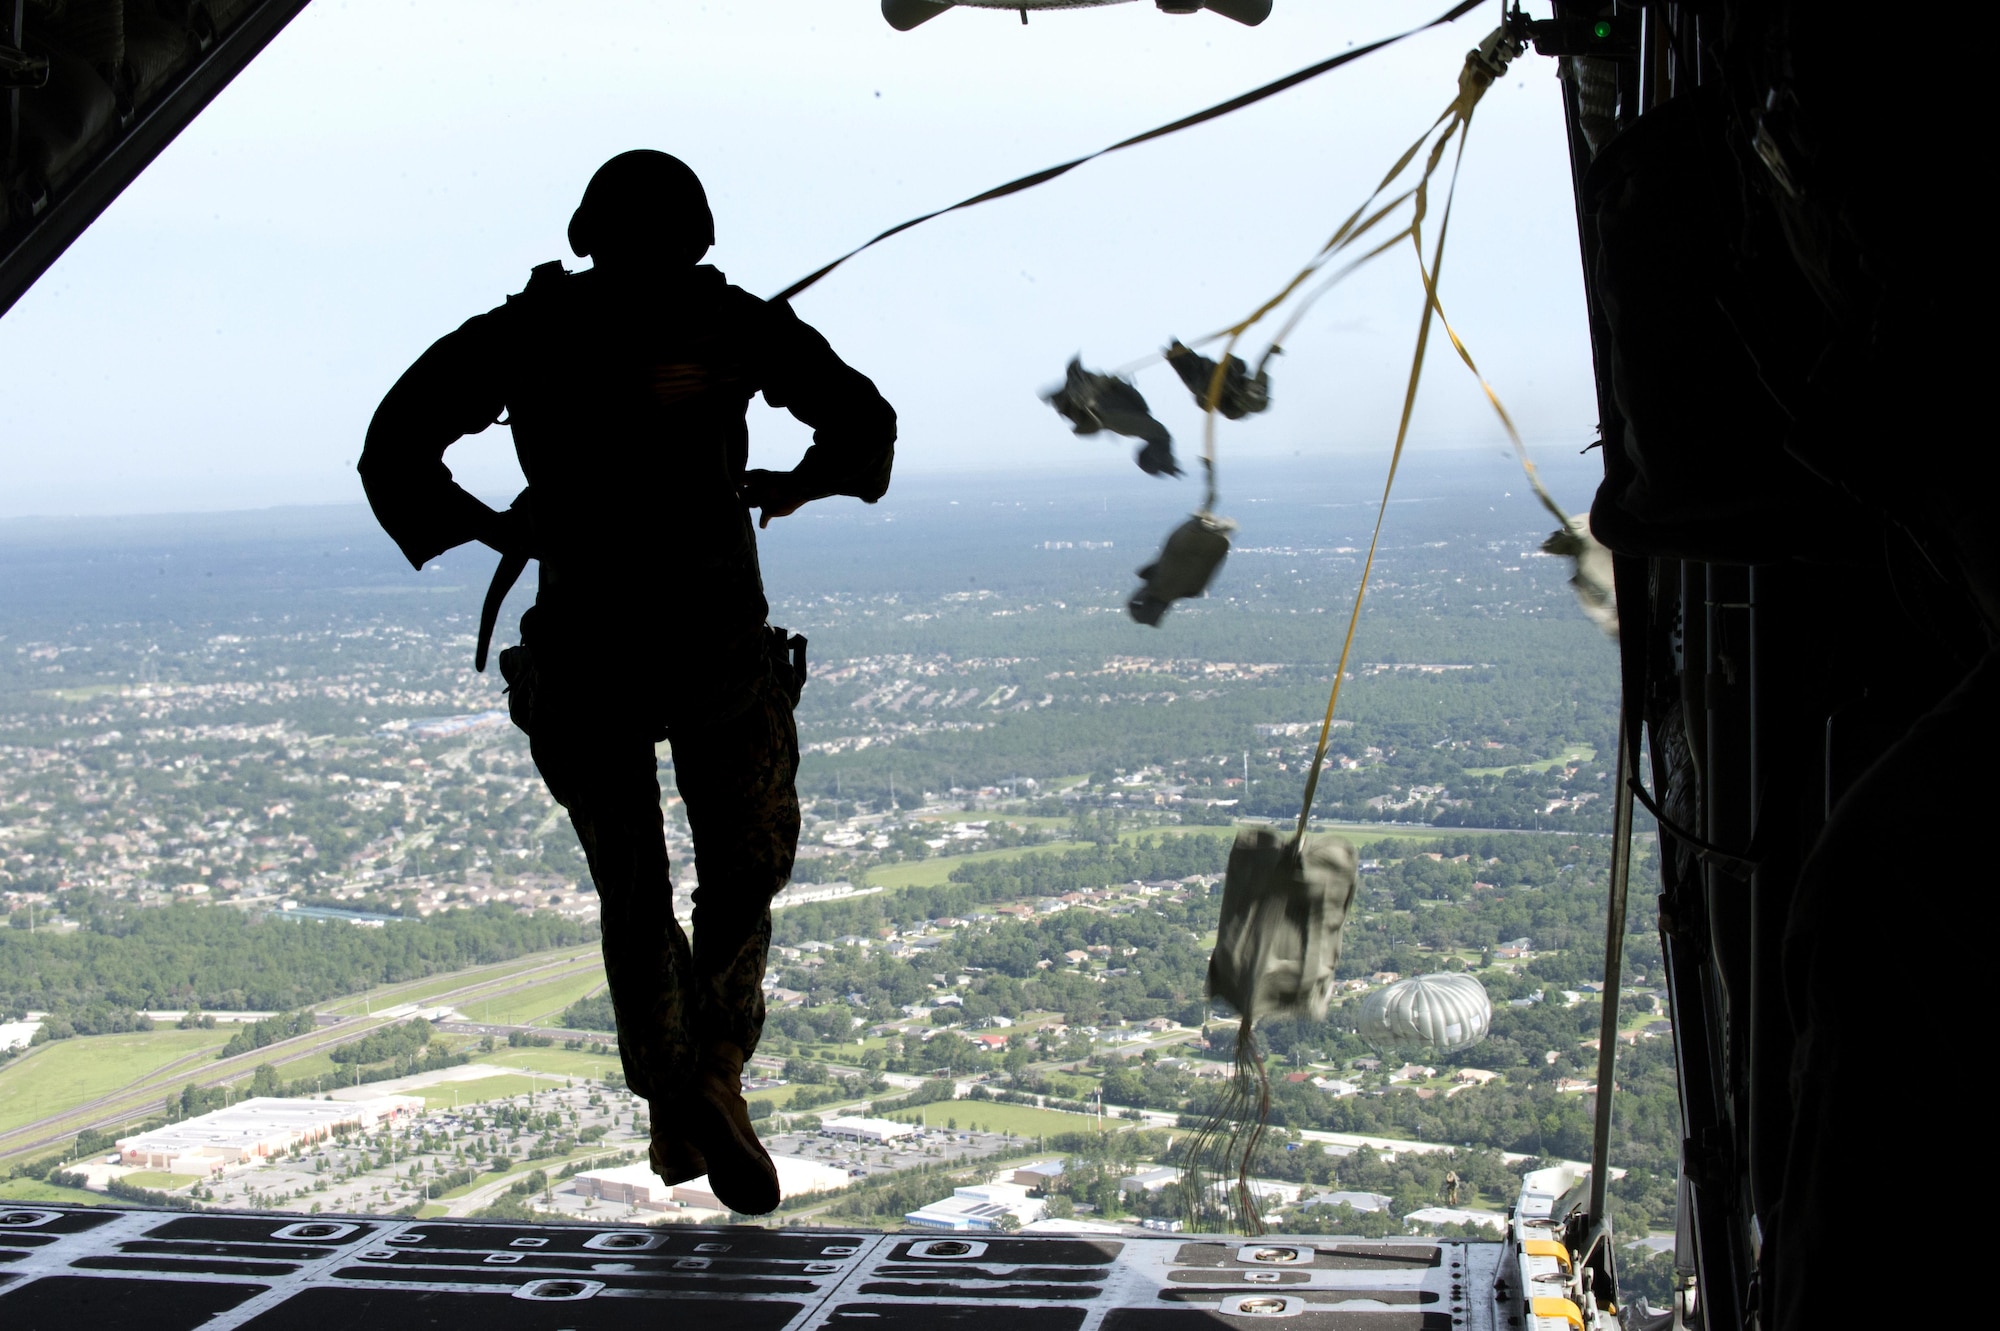 A U.S. Army service member assigned to MacDill Air Force Base, Fla., jumps out of a C-130 Hercules Aircraft over Brooksville, Fla., during a training mission, July 15, 2017. The training missions purpose was to update service members jump qualifications. (U.S Air Force Photo by Airman 1st Class Rito Smith)